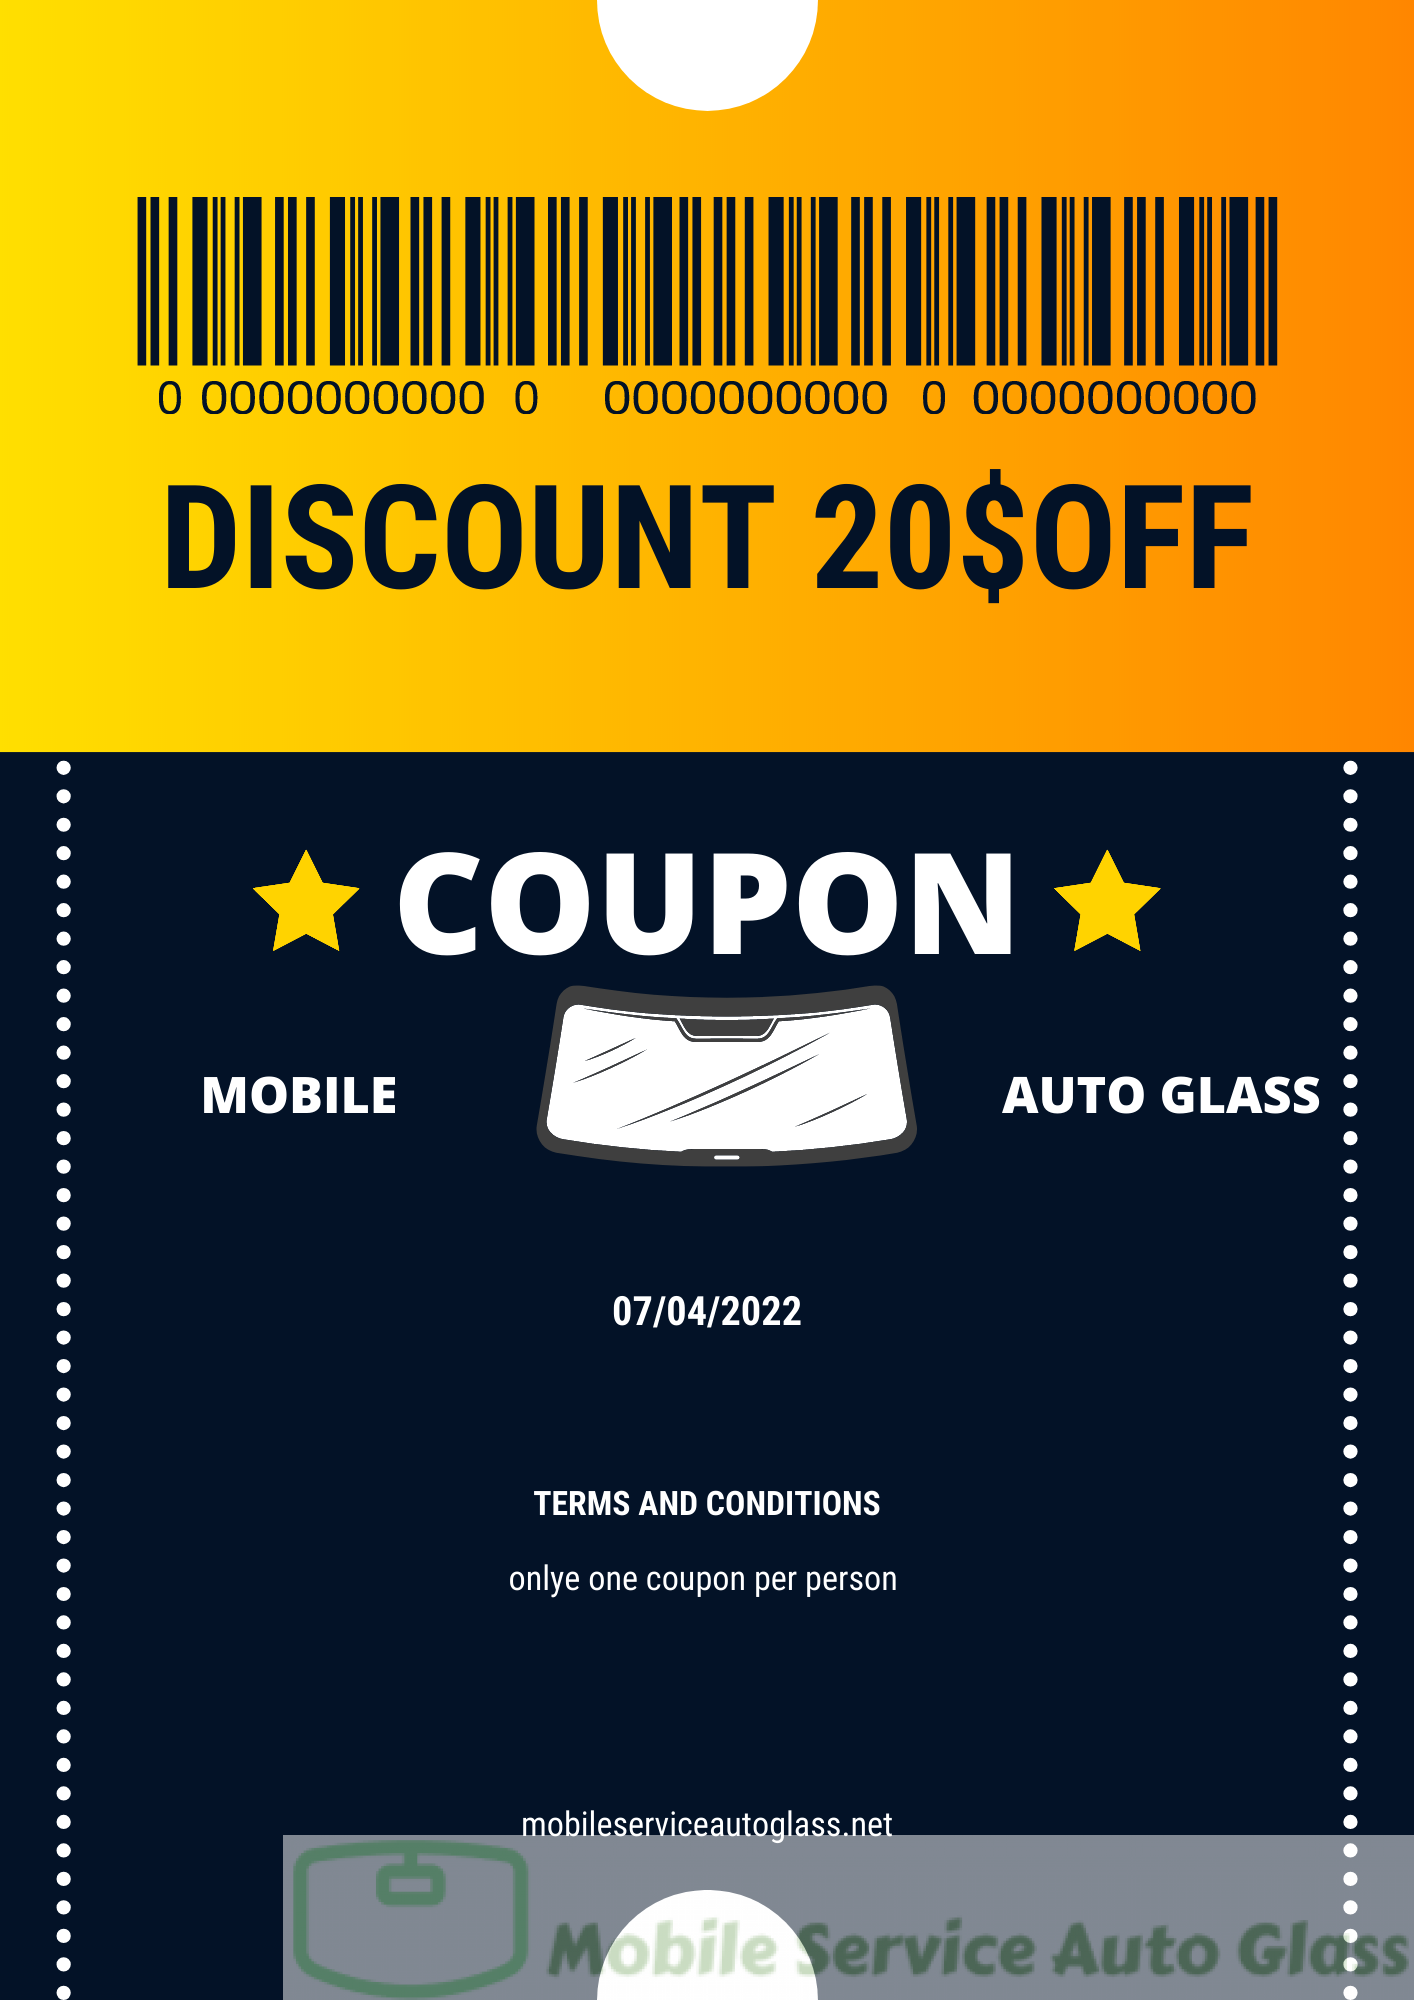 Auto glass replacement coupon